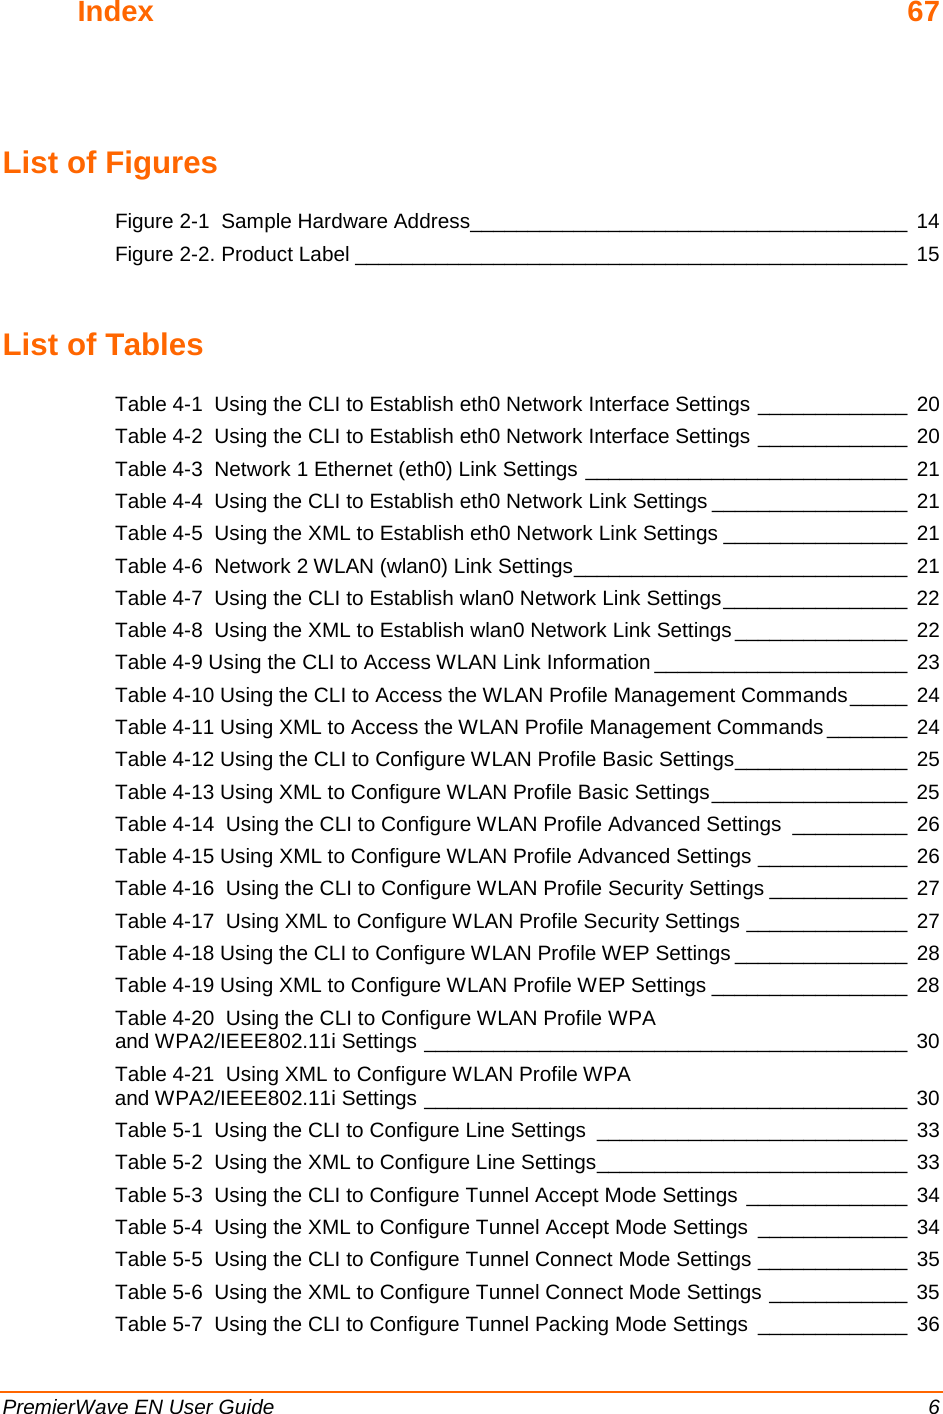  PremierWave EN User Guide    6 Index 67   List of Figures Figure 2-1  Sample Hardware Address______________________________________ 14 Figure 2-2. Product Label ________________________________________________ 15  List of Tables Table 4-1  Using the CLI to Establish eth0 Network Interface Settings _____________ 20 Table 4-2  Using the CLI to Establish eth0 Network Interface Settings _____________ 20 Table 4-3  Network 1 Ethernet (eth0) Link Settings ____________________________ 21 Table 4-4  Using the CLI to Establish eth0 Network Link Settings _________________ 21 Table 4-5  Using the XML to Establish eth0 Network Link Settings ________________ 21 Table 4-6  Network 2 WLAN (wlan0) Link Settings _____________________________ 21 Table 4-7  Using the CLI to Establish wlan0 Network Link Settings ________________ 22 Table 4-8  Using the XML to Establish wlan0 Network Link Settings _______________ 22 Table 4-9 Using the CLI to Access WLAN Link Information ______________________ 23 Table 4-10 Using the CLI to Access the WLAN Profile Management Commands _____ 24 Table 4-11 Using XML to Access the WLAN Profile Management Commands _______ 24 Table 4-12 Using the CLI to Configure WLAN Profile Basic Settings _______________ 25 Table 4-13 Using XML to Configure WLAN Profile Basic Settings _________________ 25 Table 4-14  Using the CLI to Configure WLAN Profile Advanced Settings __________ 26 Table 4-15 Using XML to Configure WLAN Profile Advanced Settings _____________ 26 Table 4-16  Using the CLI to Configure WLAN Profile Security Settings ____________ 27 Table 4-17  Using XML to Configure WLAN Profile Security Settings ______________ 27 Table 4-18 Using the CLI to Configure WLAN Profile WEP Settings _______________ 28 Table 4-19 Using XML to Configure WLAN Profile WEP Settings _________________ 28 Table 4-20  Using the CLI to Configure WLAN Profile WPA  and WPA2/IEEE802.11i Settings __________________________________________ 30 Table 4-21  Using XML to Configure WLAN Profile WPA  and WPA2/IEEE802.11i Settings __________________________________________ 30 Table 5-1  Using the CLI to Configure Line Settings ___________________________ 33 Table 5-2  Using the XML to Configure Line Settings ___________________________ 33 Table 5-3  Using the CLI to Configure Tunnel Accept Mode Settings ______________ 34 Table 5-4  Using the XML to Configure Tunnel Accept Mode Settings _____________ 34 Table 5-5  Using the CLI to Configure Tunnel Connect Mode Settings _____________ 35 Table 5-6  Using the XML to Configure Tunnel Connect Mode Settings ____________ 35 Table 5-7  Using the CLI to Configure Tunnel Packing Mode Settings _____________ 36 